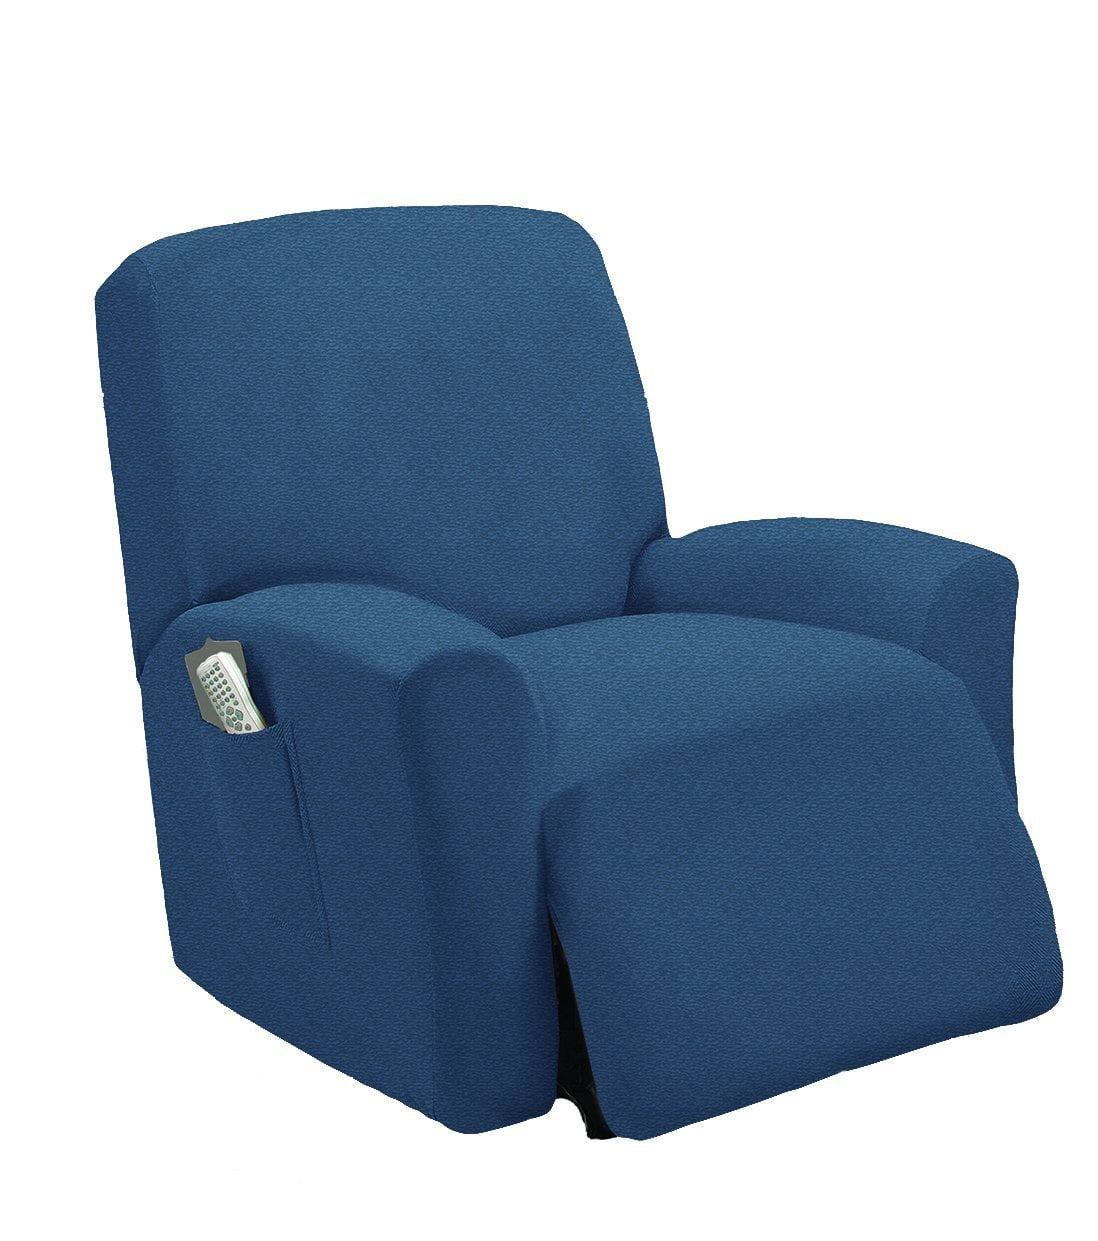 Details about   1Seater Wing Back Arm Chair Cover Slipcover Elastic Wingback Sofa Chair Cover 